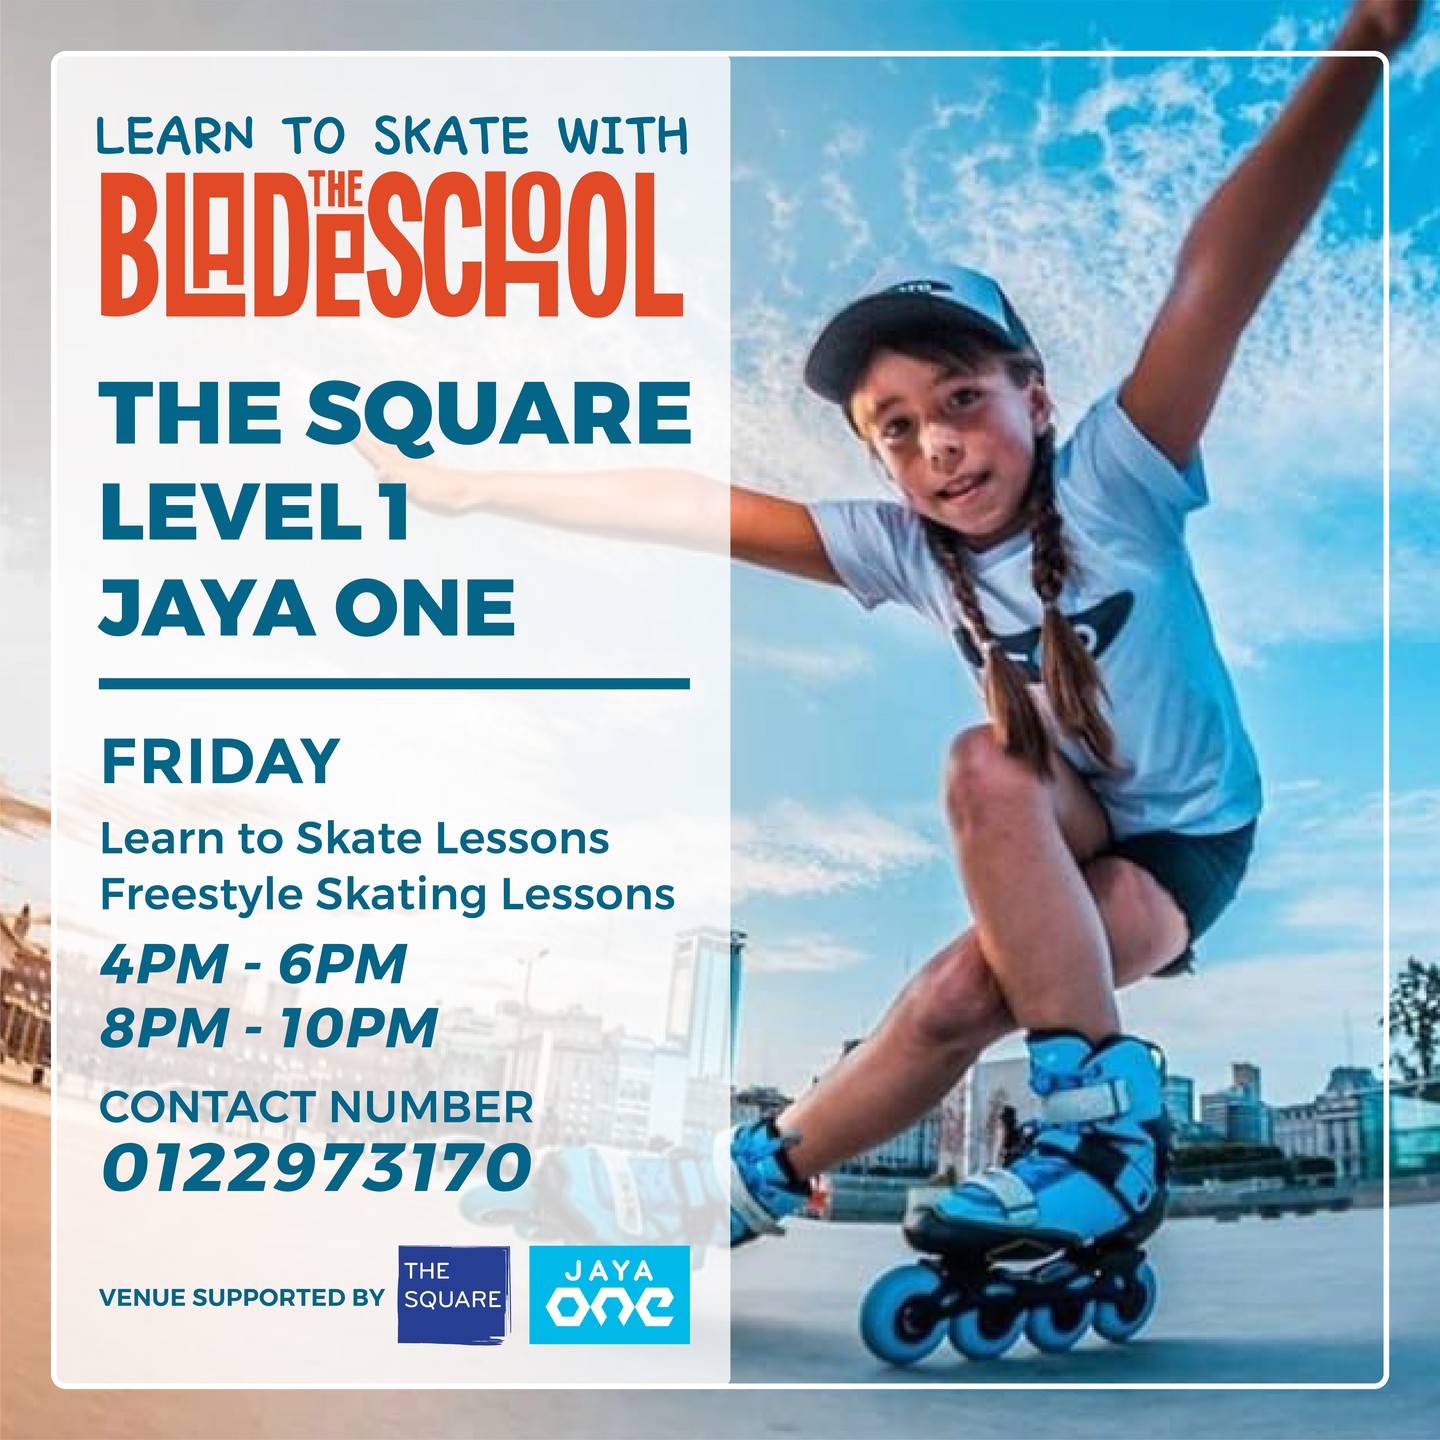 learn to skate with The Blade School